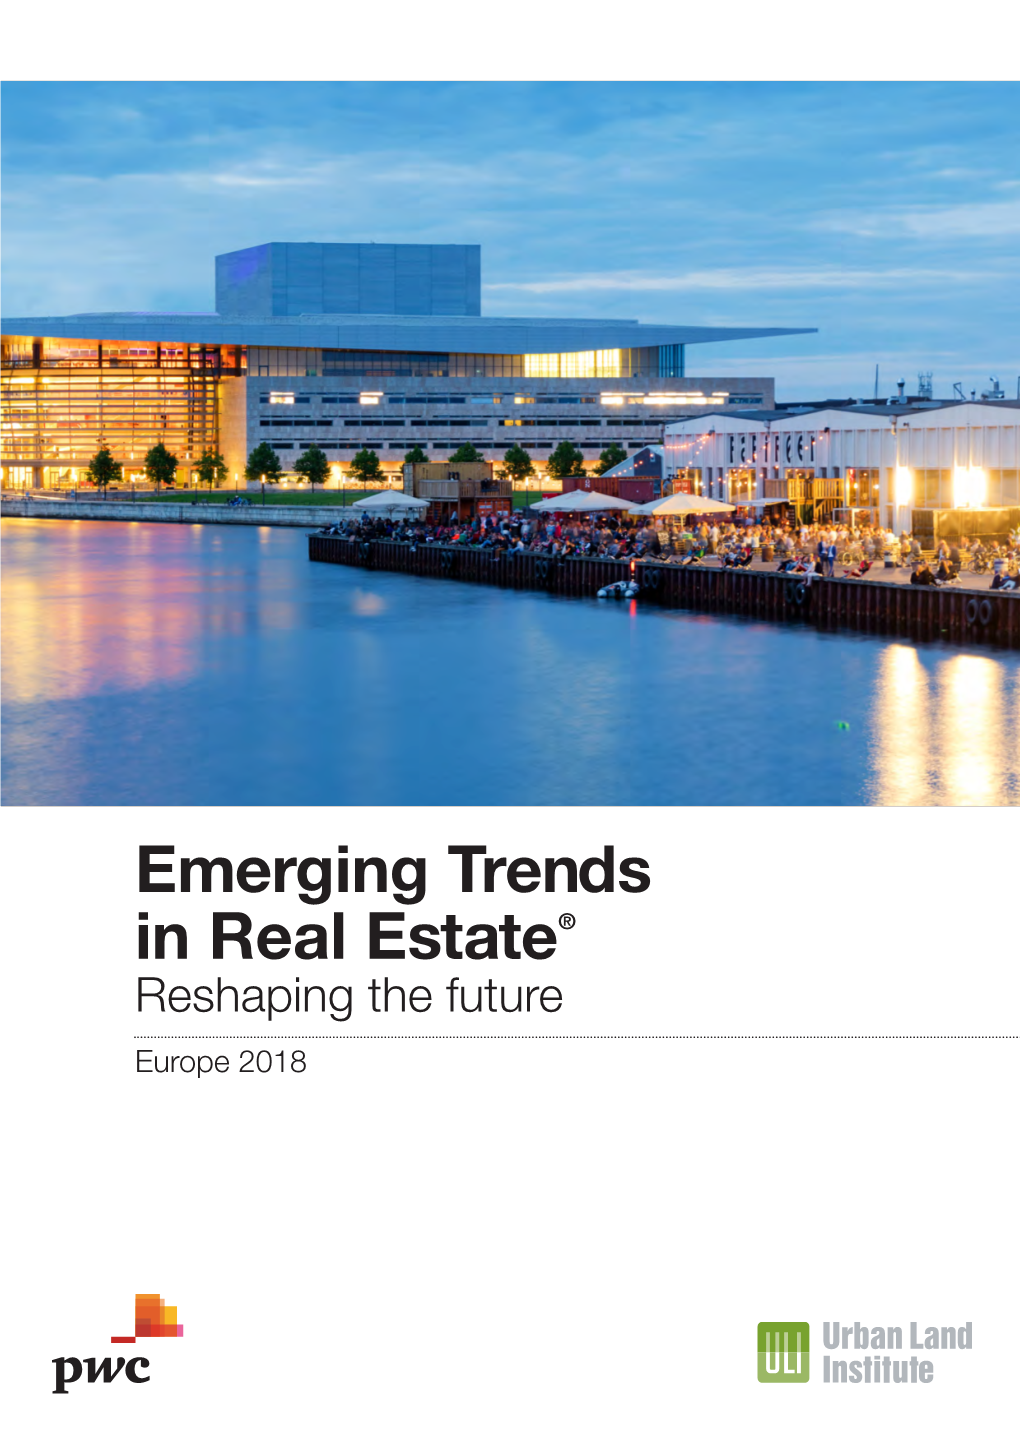 Emerging Trends in Real Estate®: Europe 2018